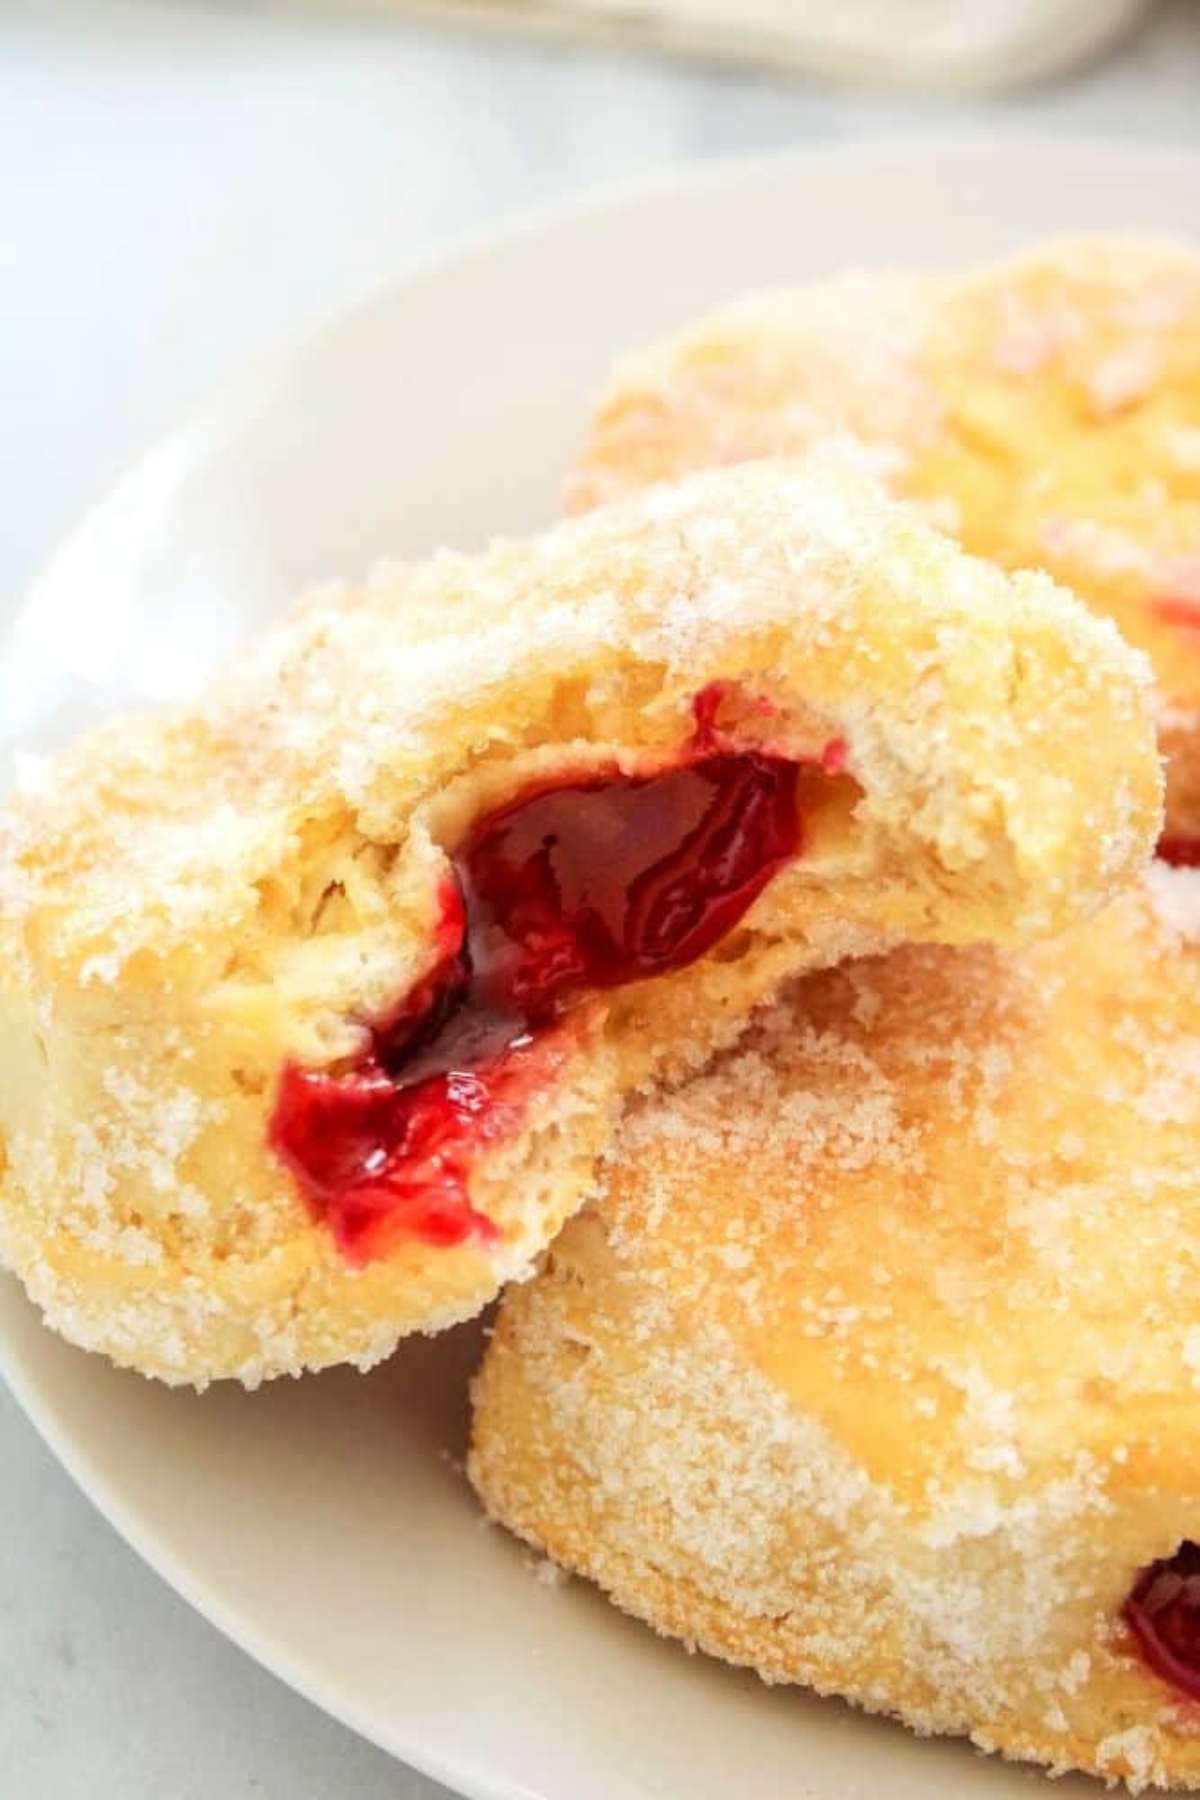 Jelly stuffed donut on a plate with a bite taken out of the donut.